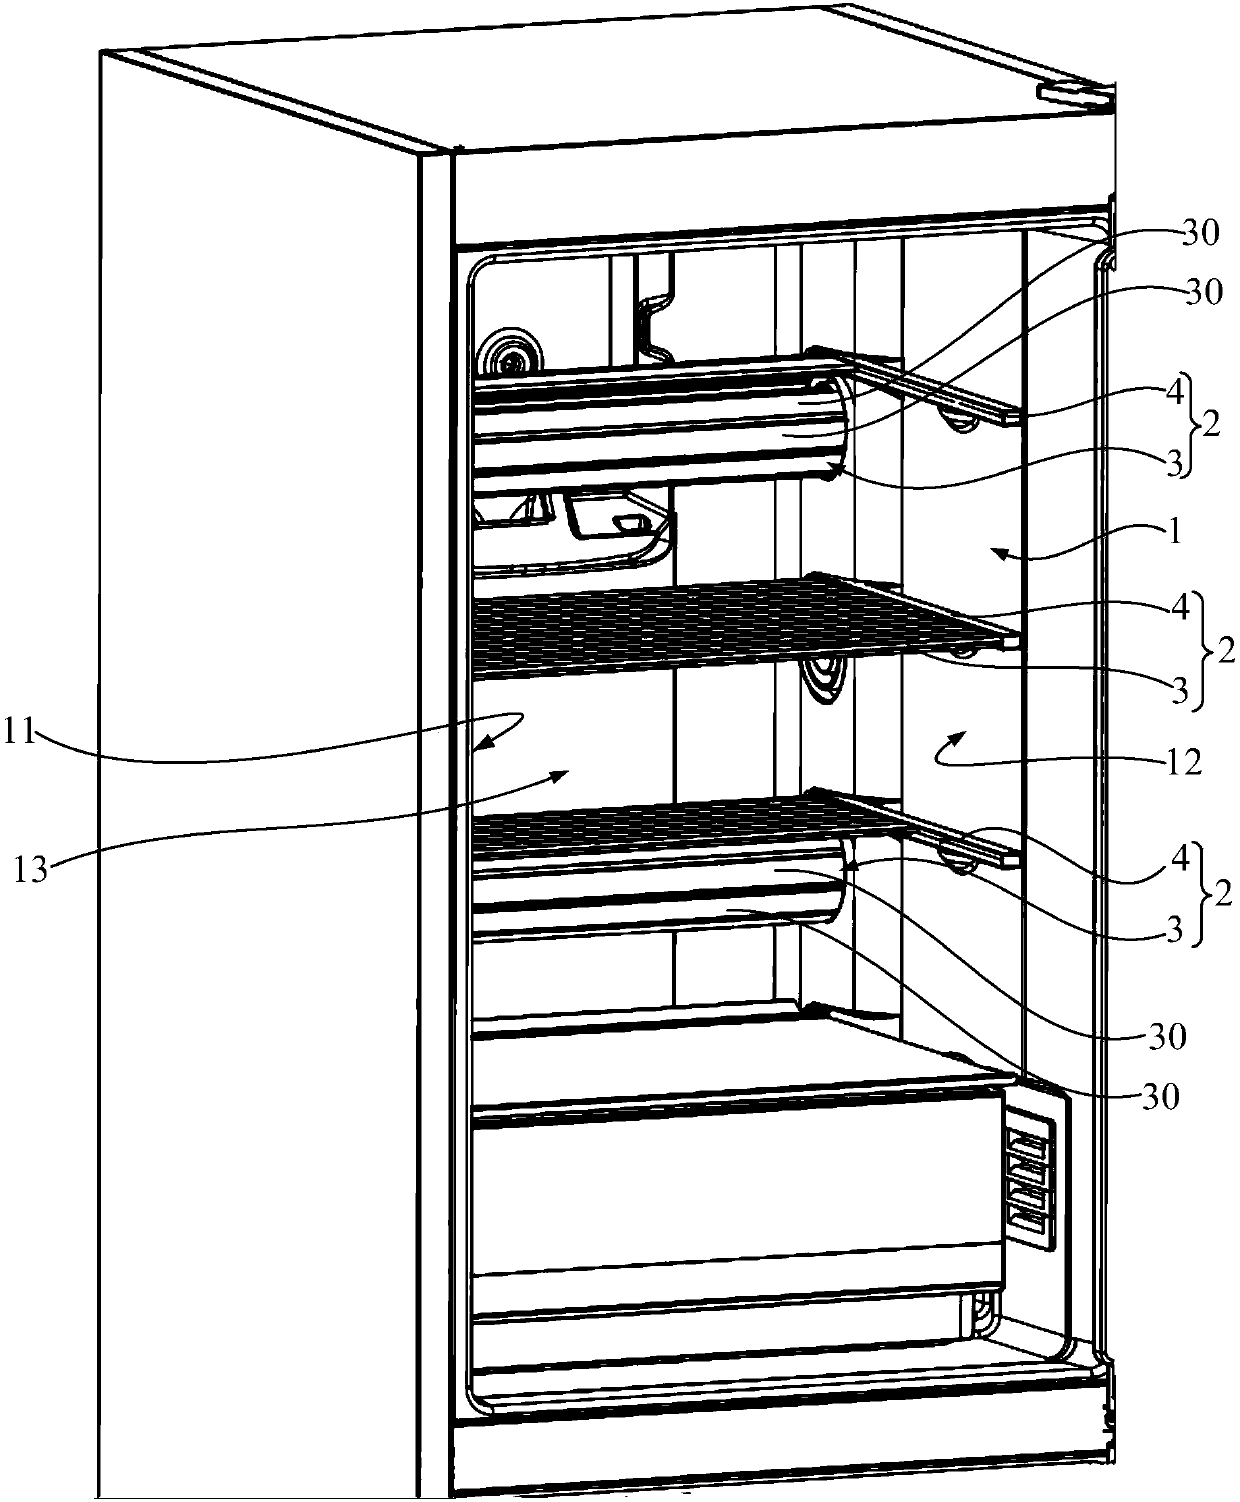 Refrigerator and storage devices used for refrigerator